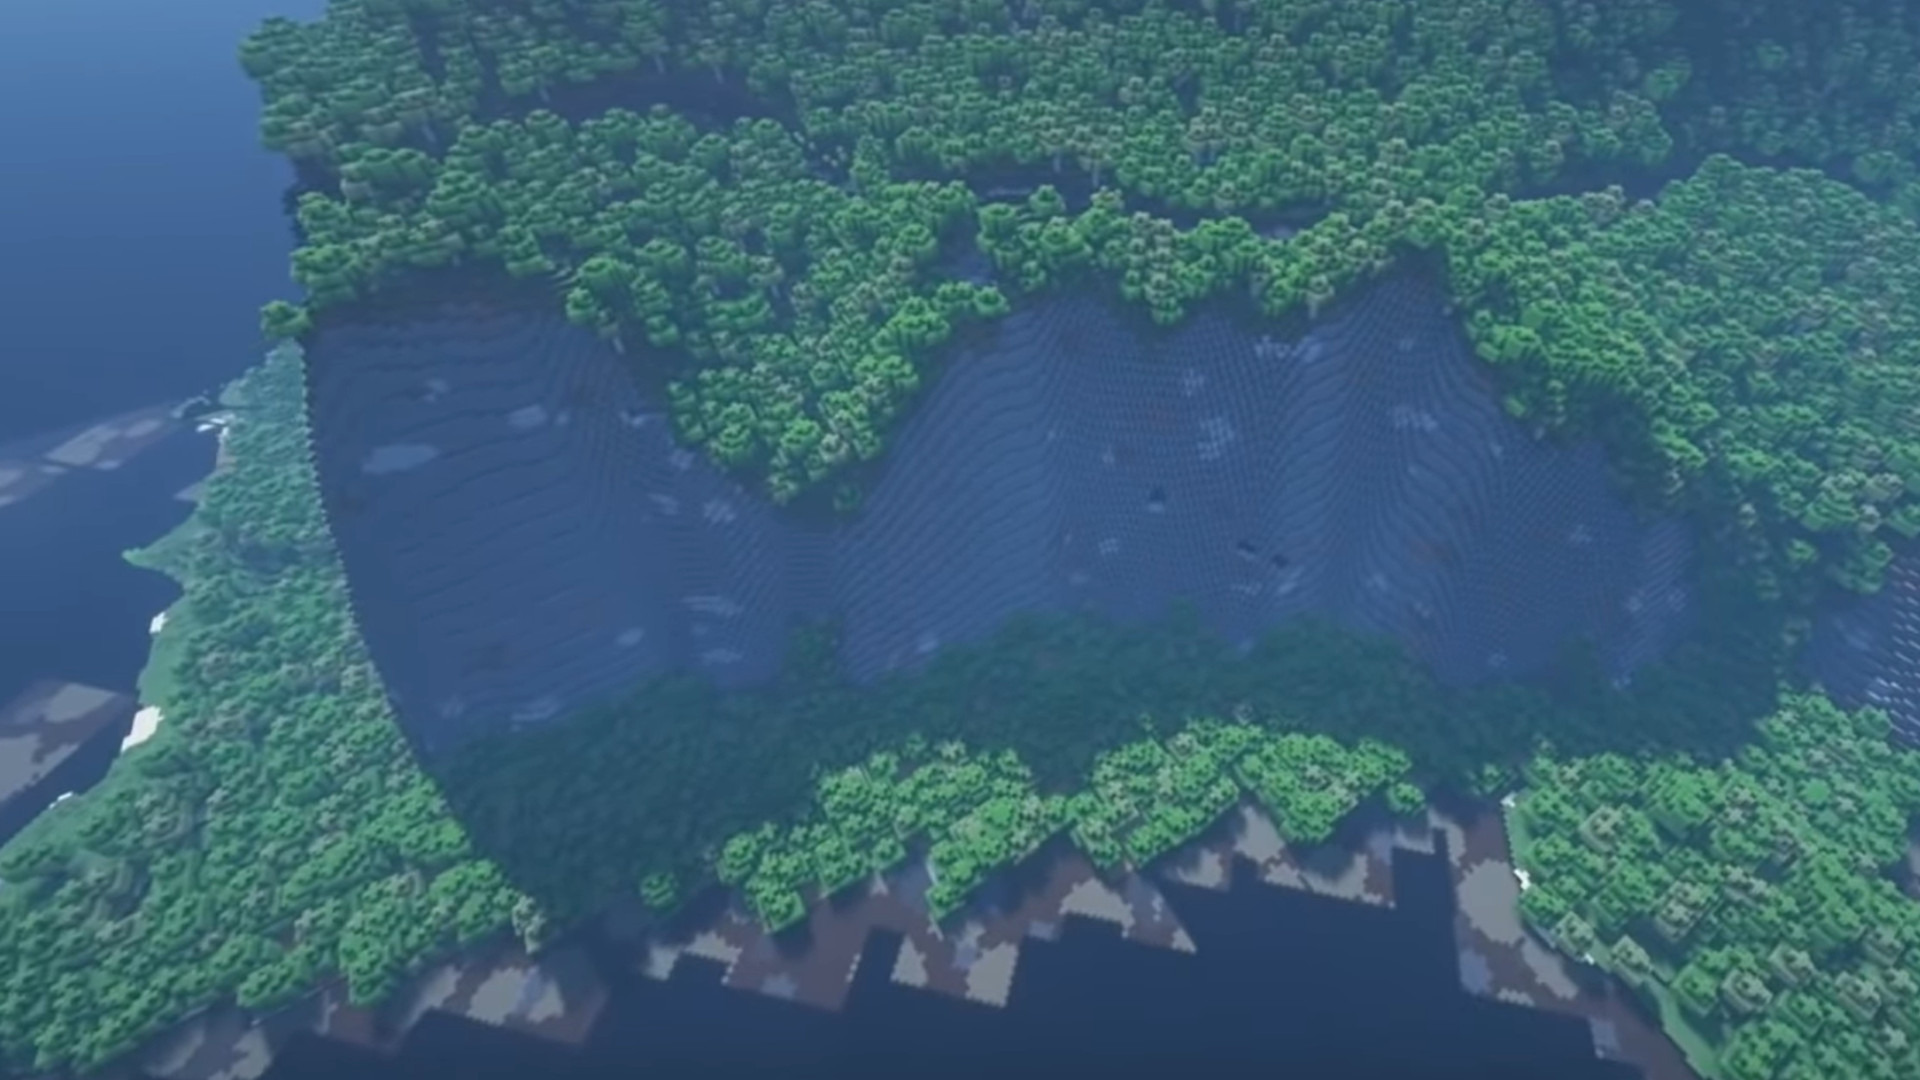 But Can we ACTUALLY Build the Earth 1:1 Scale in Minecraft? by